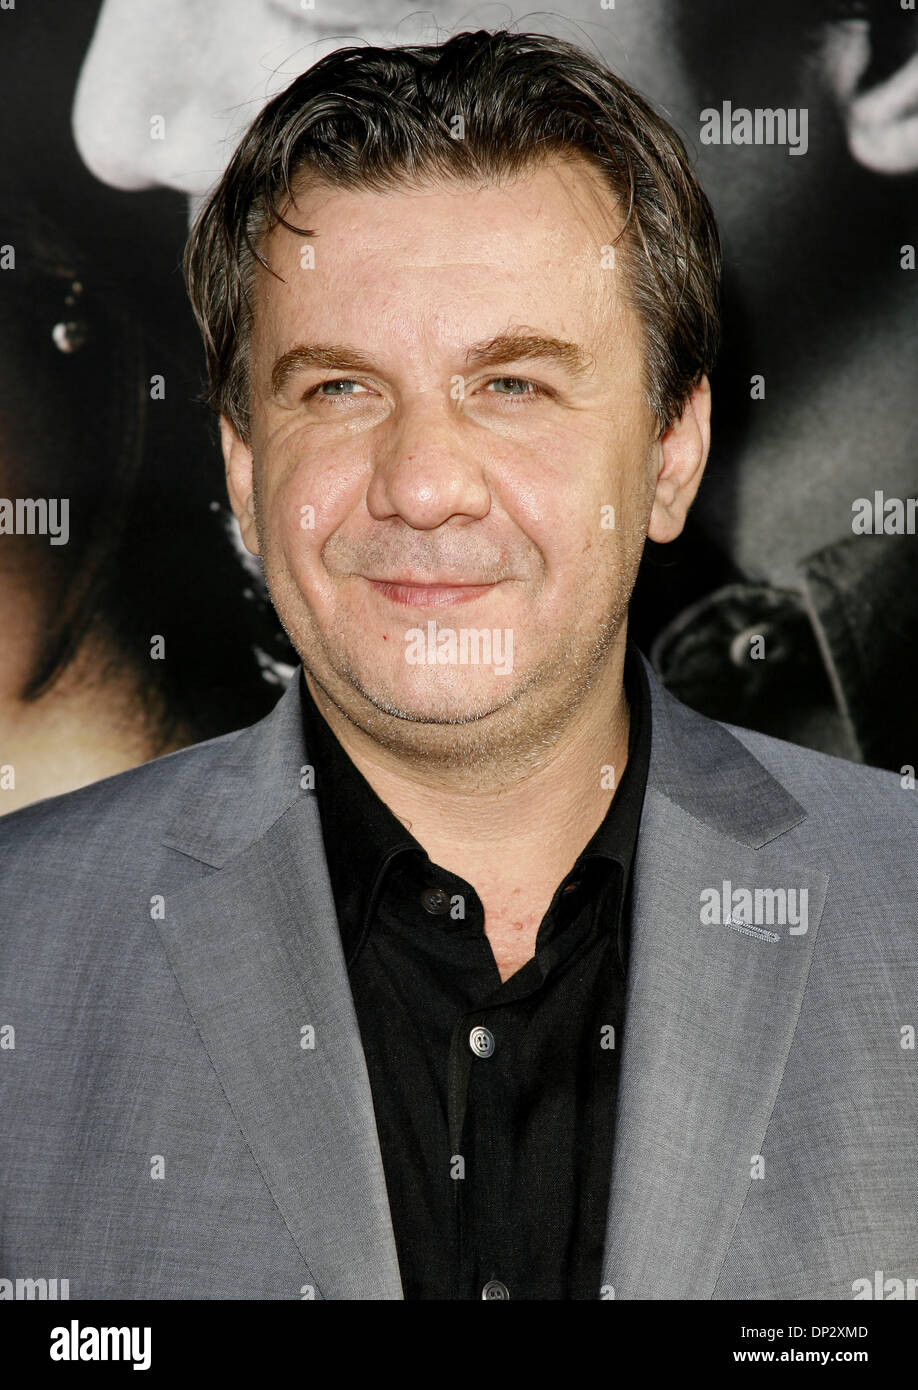 Jun 13, 2006; Los Angeles, CA, USA; Director ALEJANDRO AGRESTI at the world premiere of 'The Lake House' held at the Arclight Cinerama Dome. Mandatory Credit: Photo by Lisa O'Connor/ZUMA Press. (©) Copyright 2006 by Lisa O'Connor Stock Photo